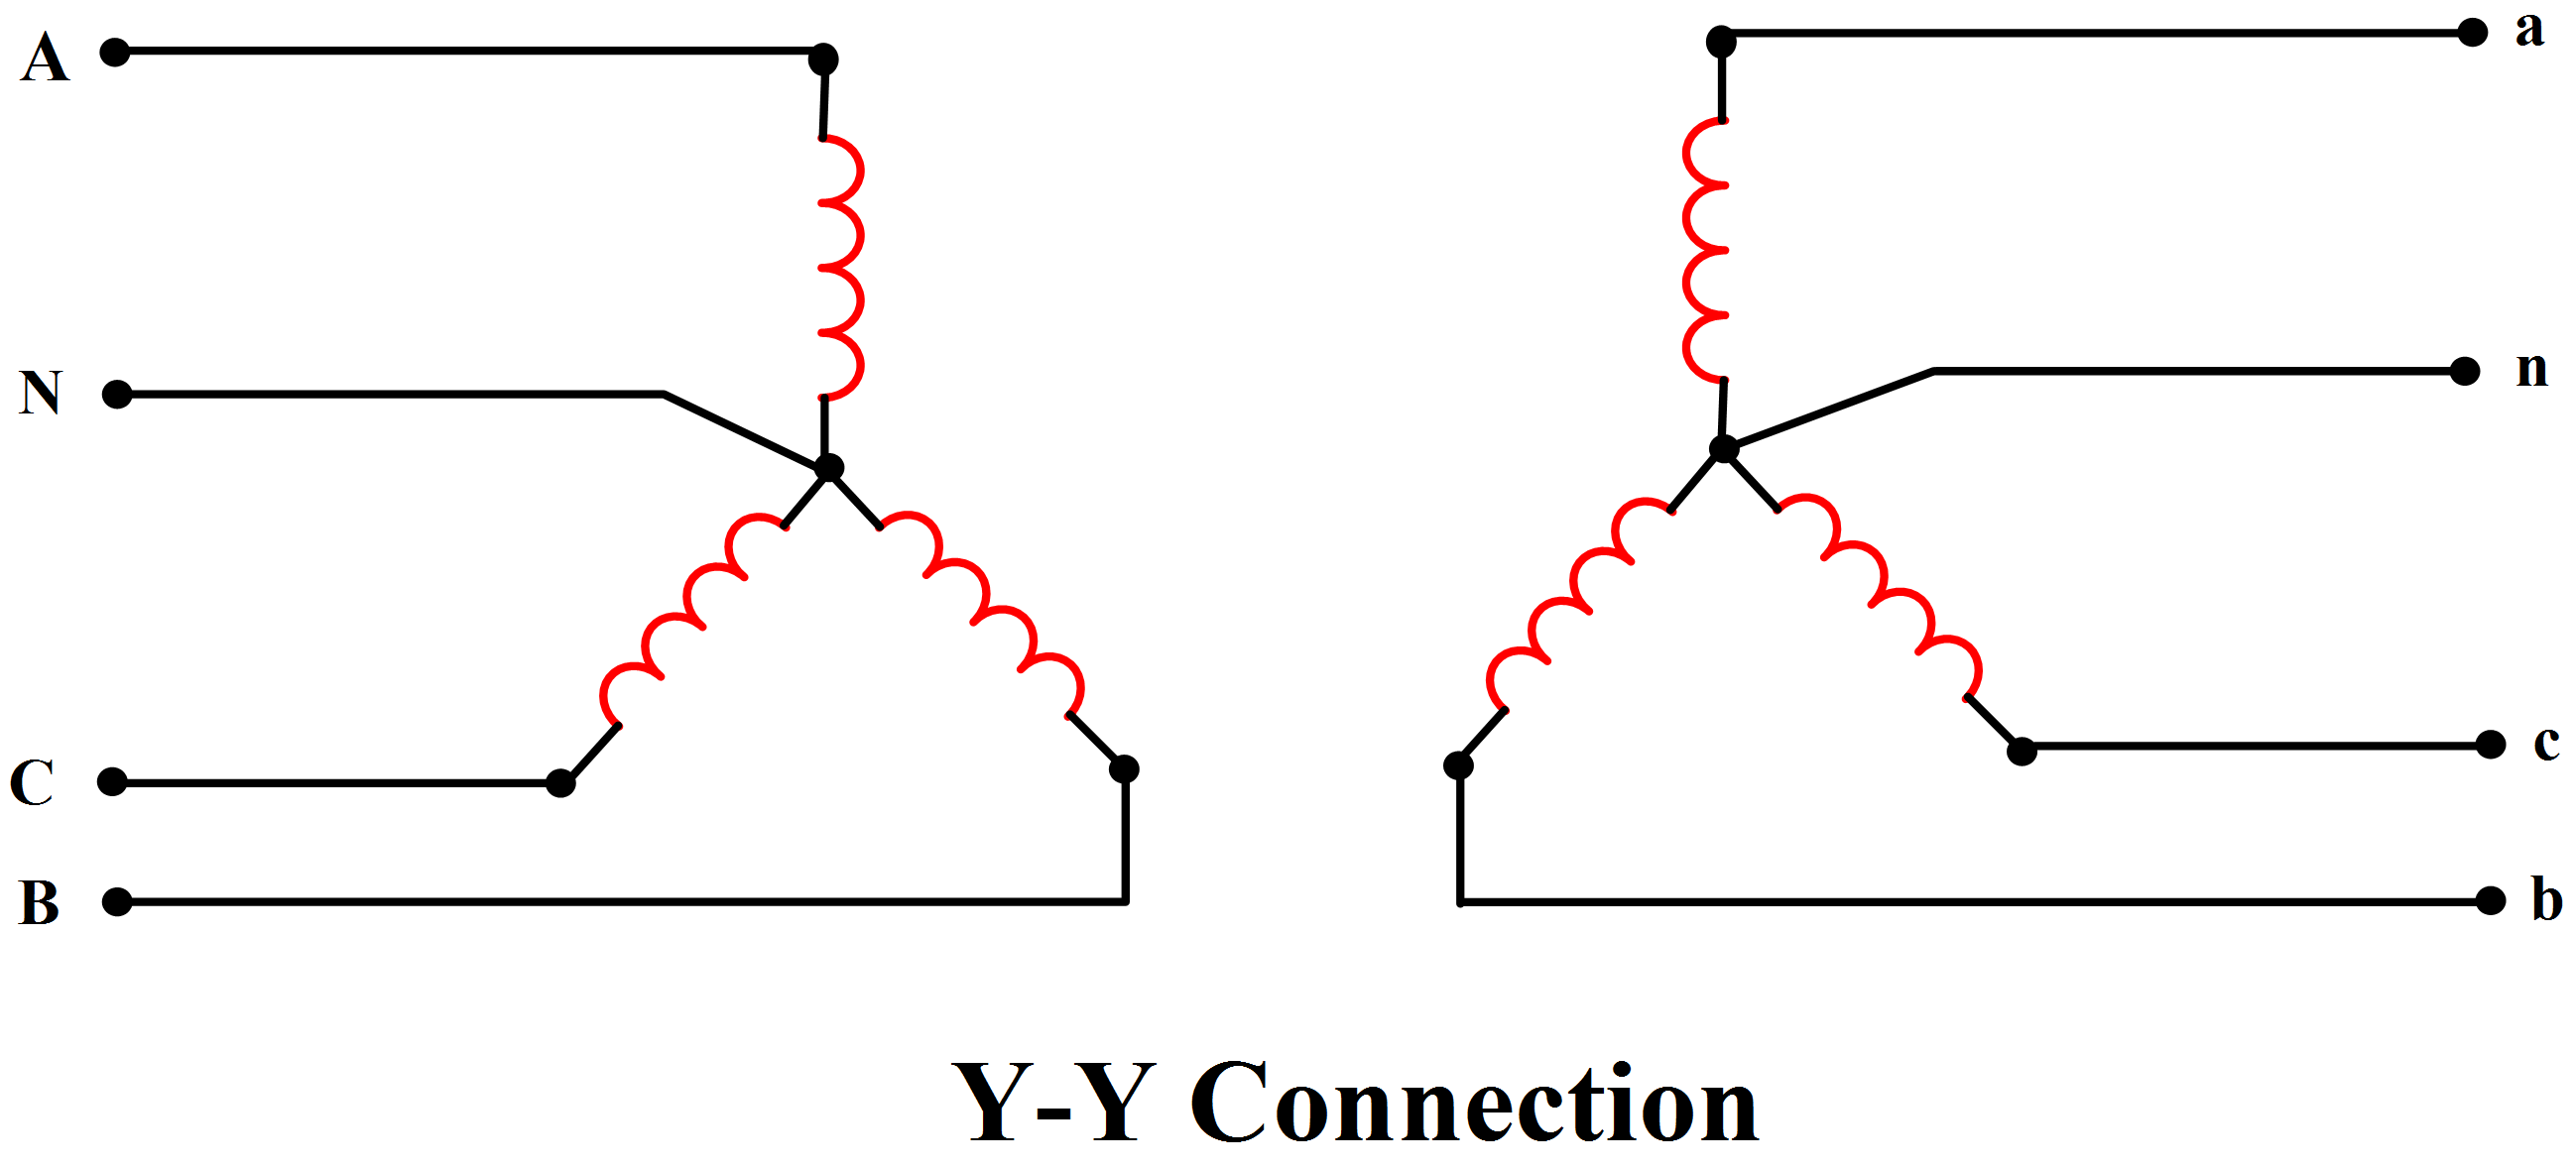 Three Phase Transformer Connections Phasor Diagrams